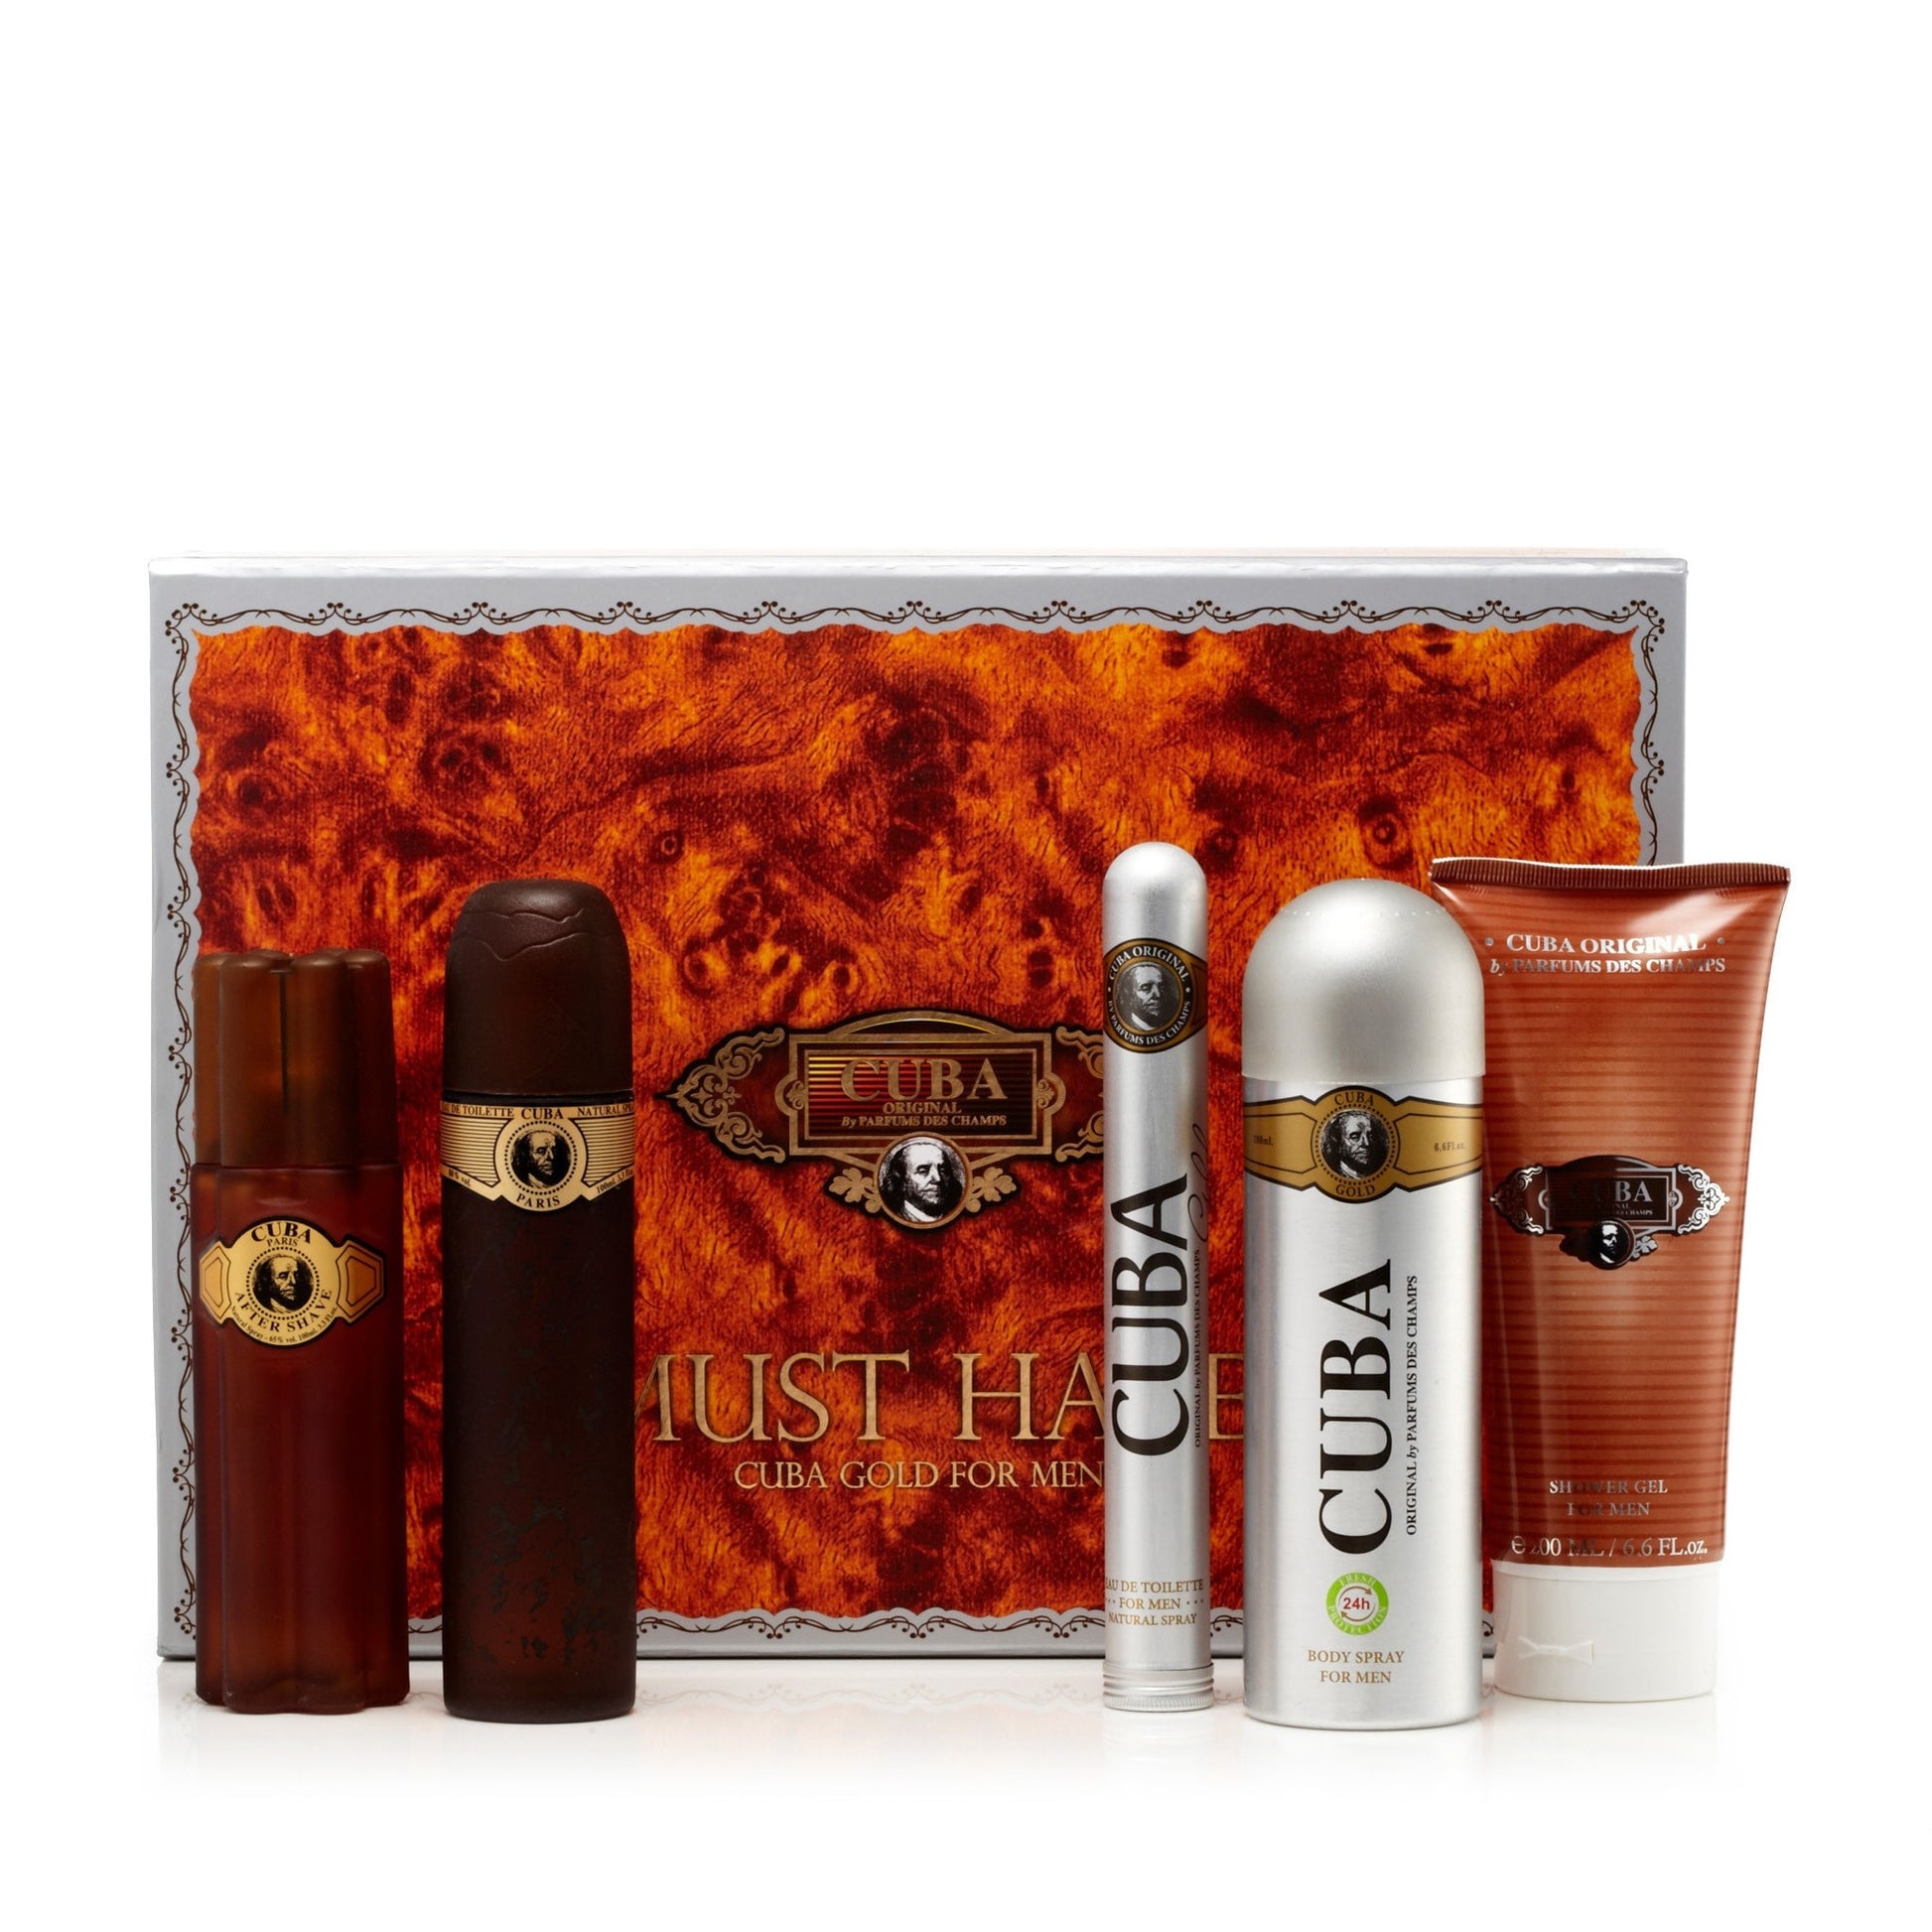 Must Have Gold Gift Set for Men by Cuba 3.3 oz. Click to open in modal